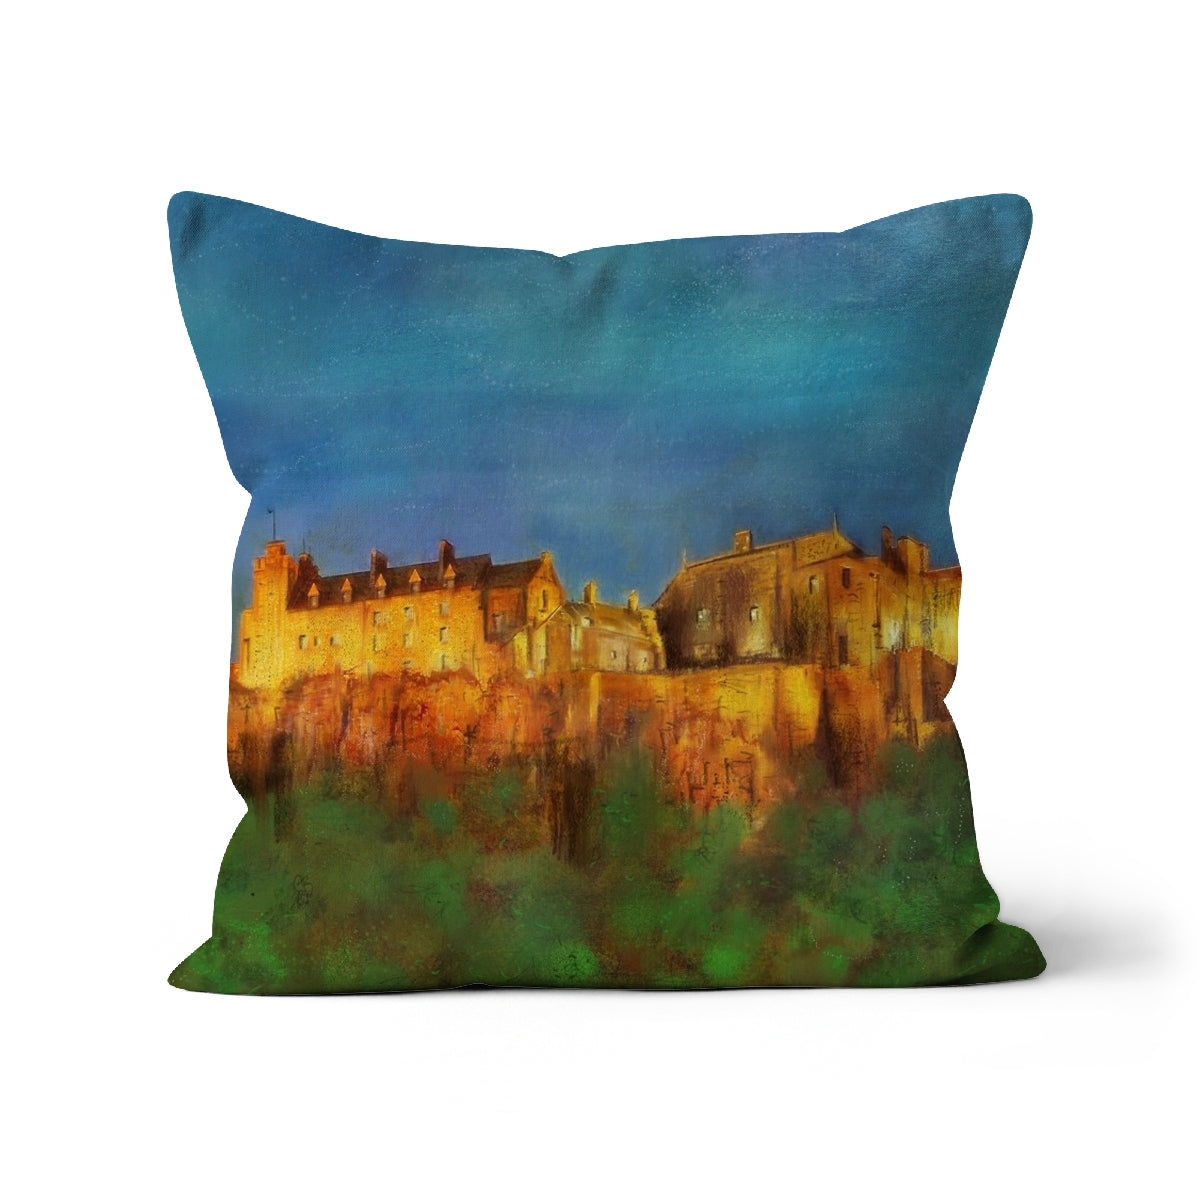 Stirling Castle Art Gifts Cushion-Cushions-Historic & Iconic Scotland Art Gallery-Linen-18"x18"-Paintings, Prints, Homeware, Art Gifts From Scotland By Scottish Artist Kevin Hunter